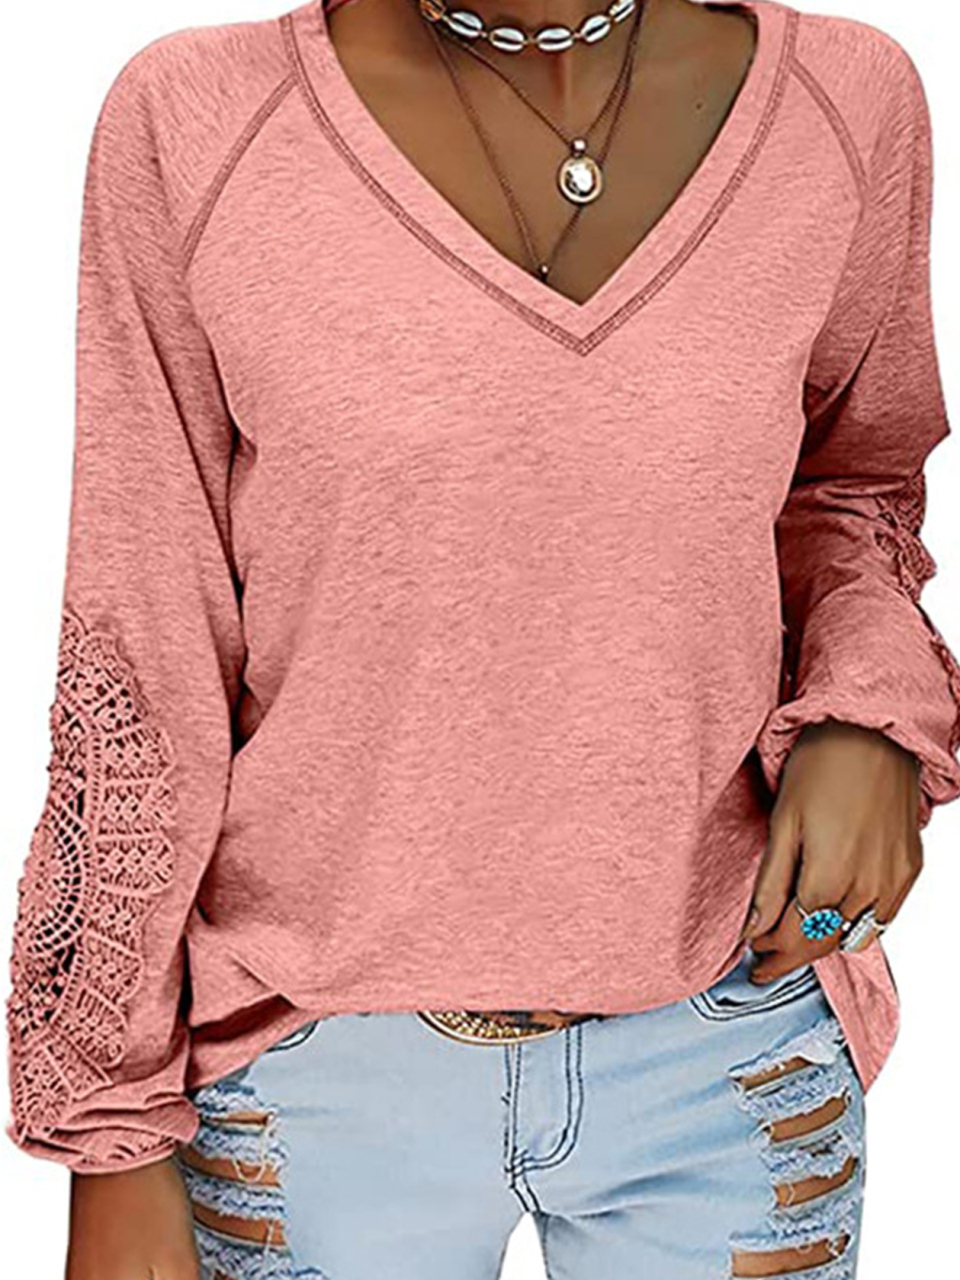 Women's Fashion Casual V Neck Lace Top